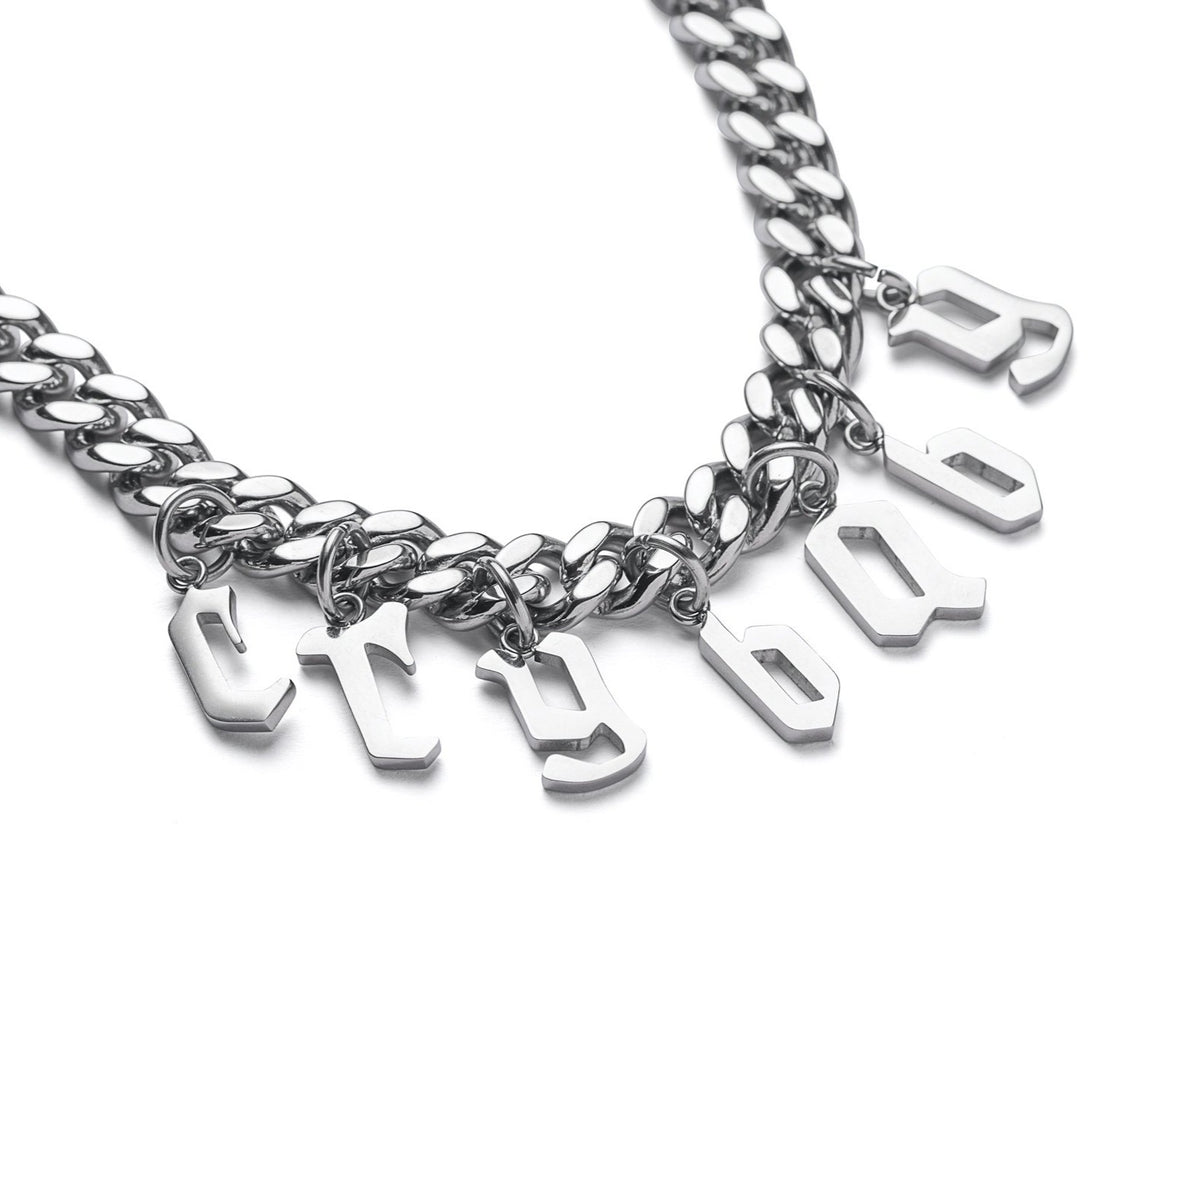 Customisable Cuban Link Chain Necklace by Statement_02